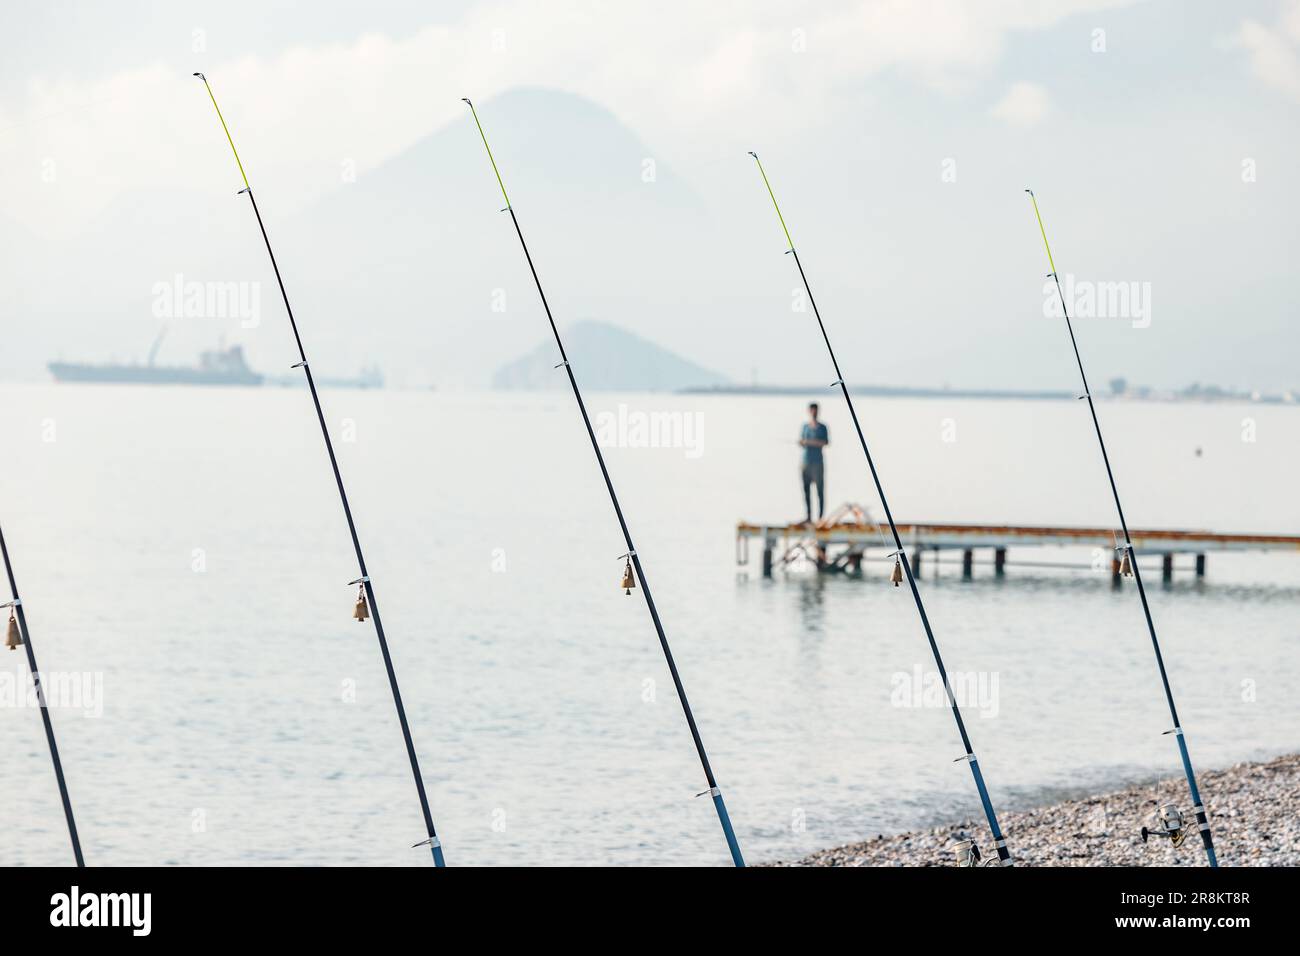 https://c8.alamy.com/comp/2R8KT8R/row-of-fishing-rods-on-a-sea-coast-recreation-and-sport-concept-2R8KT8R.jpg